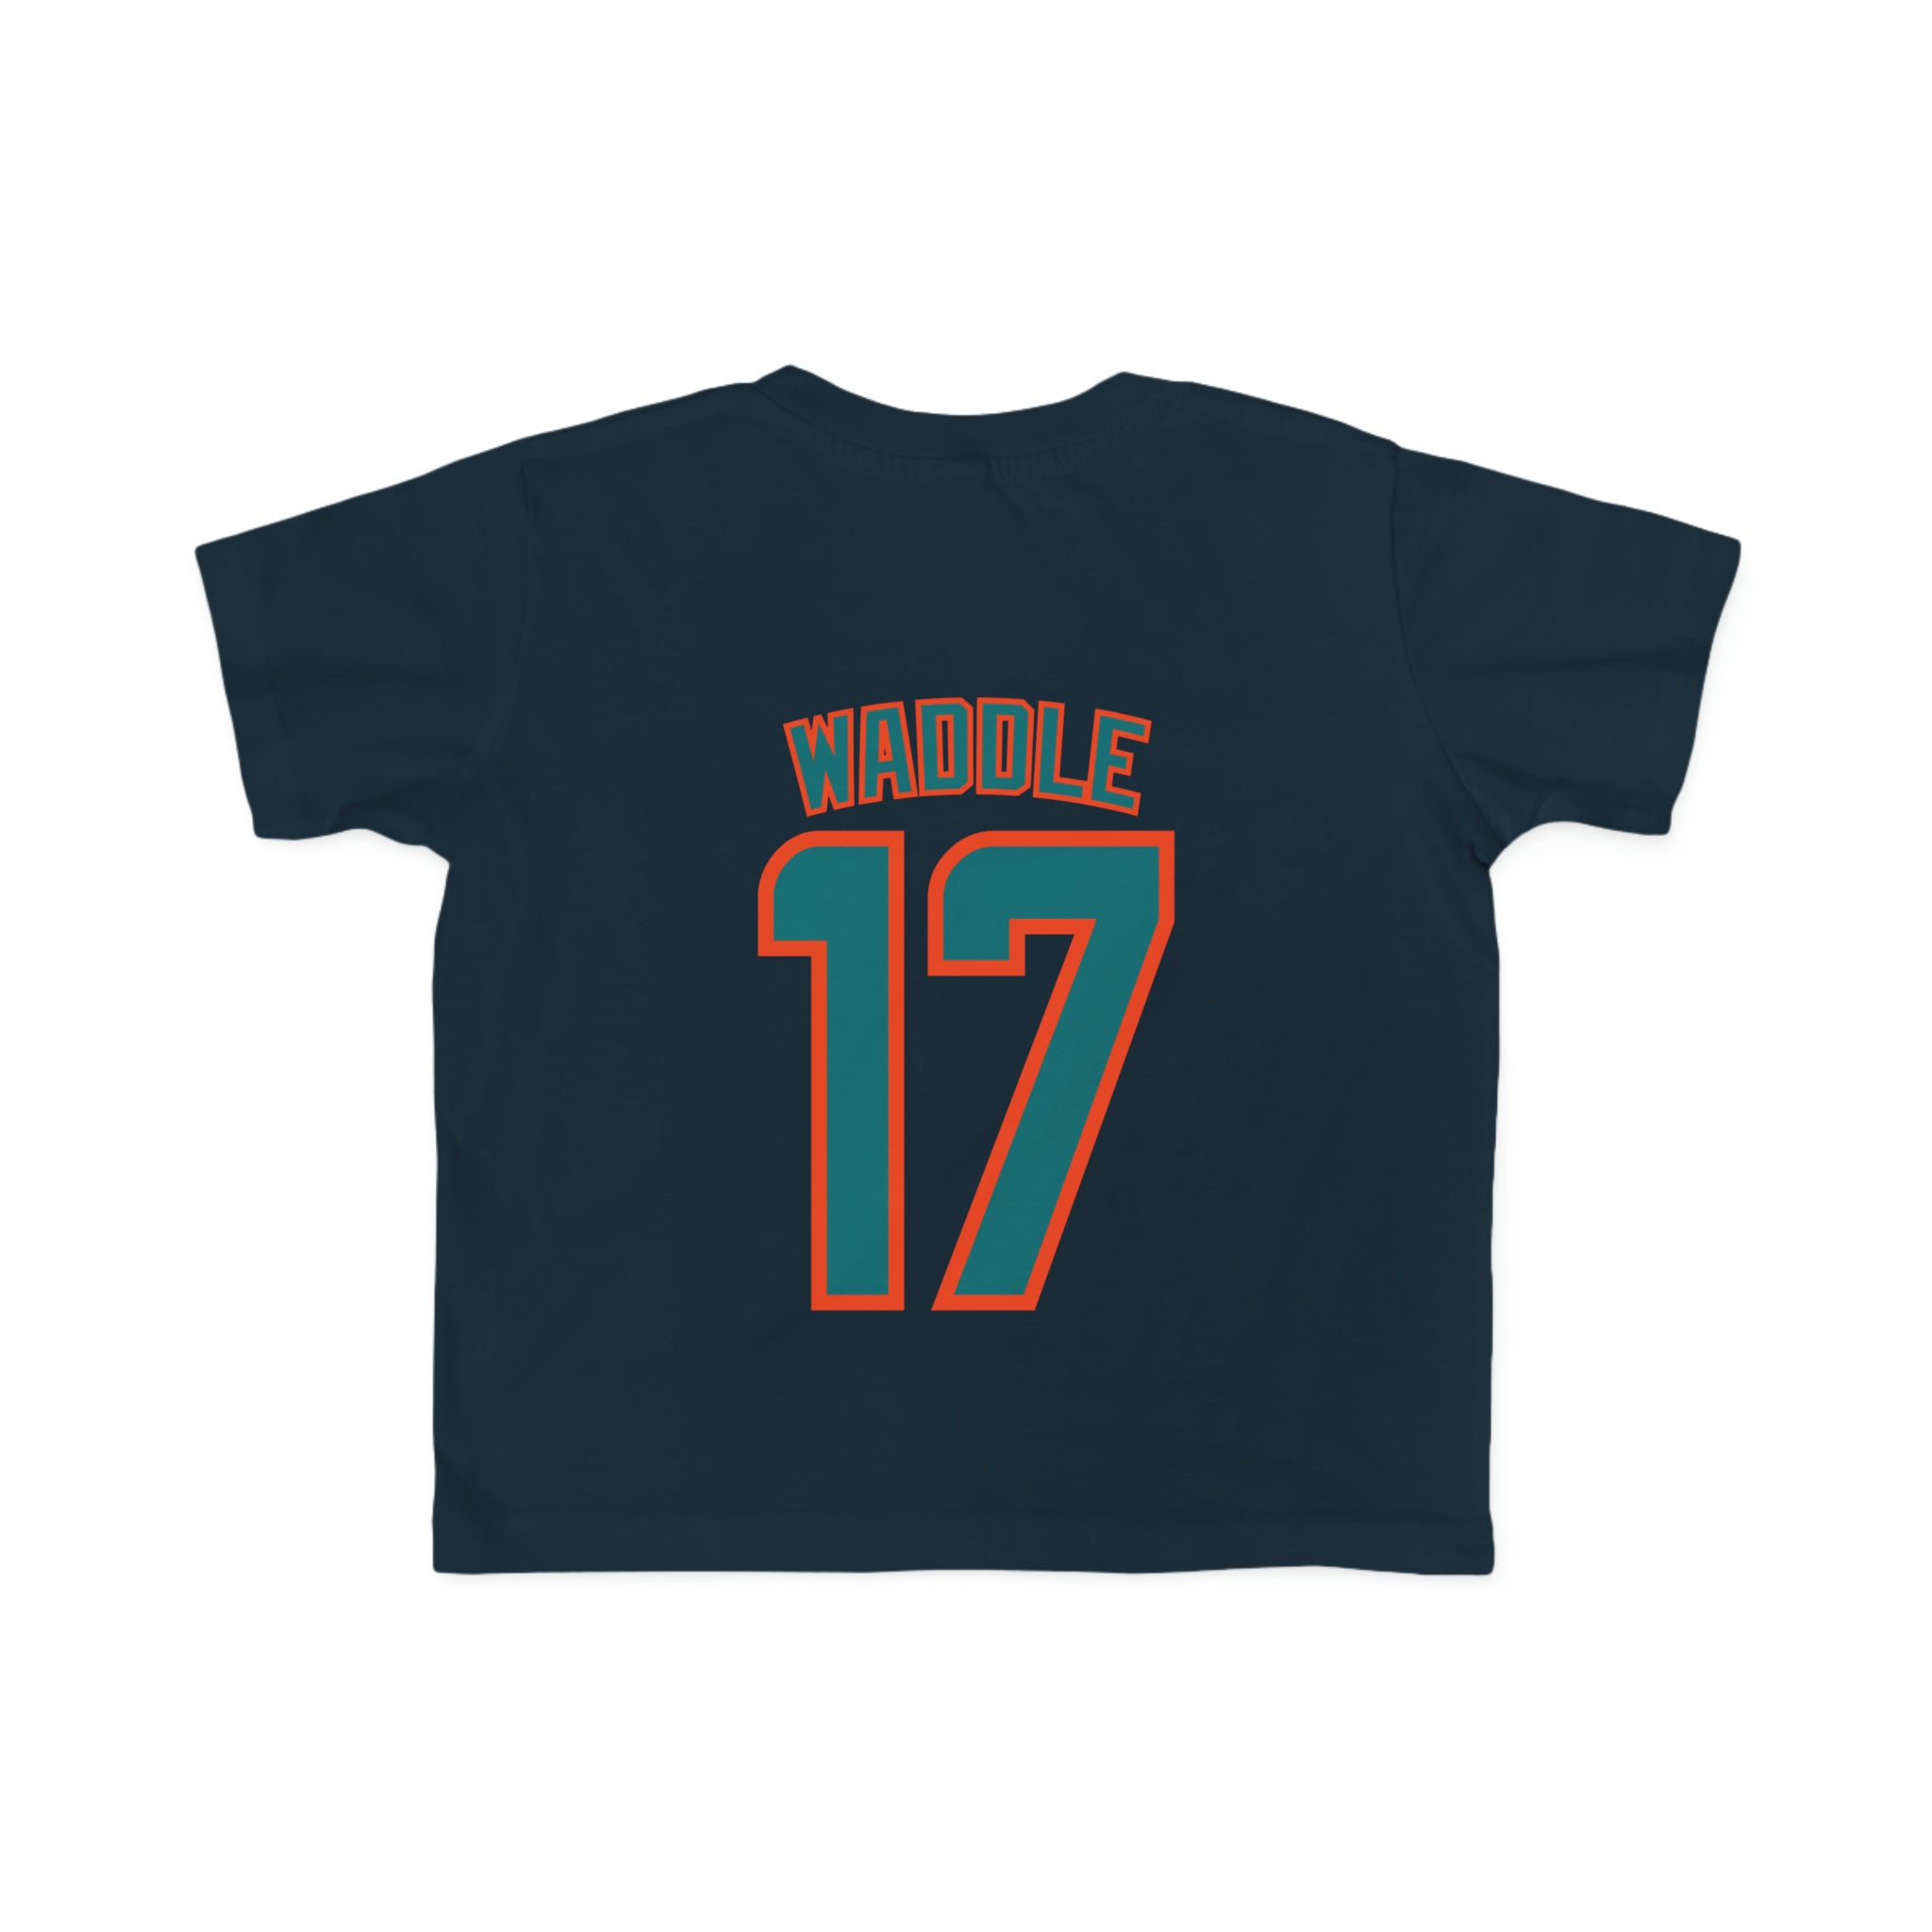 Toddler Waddle Player Tee